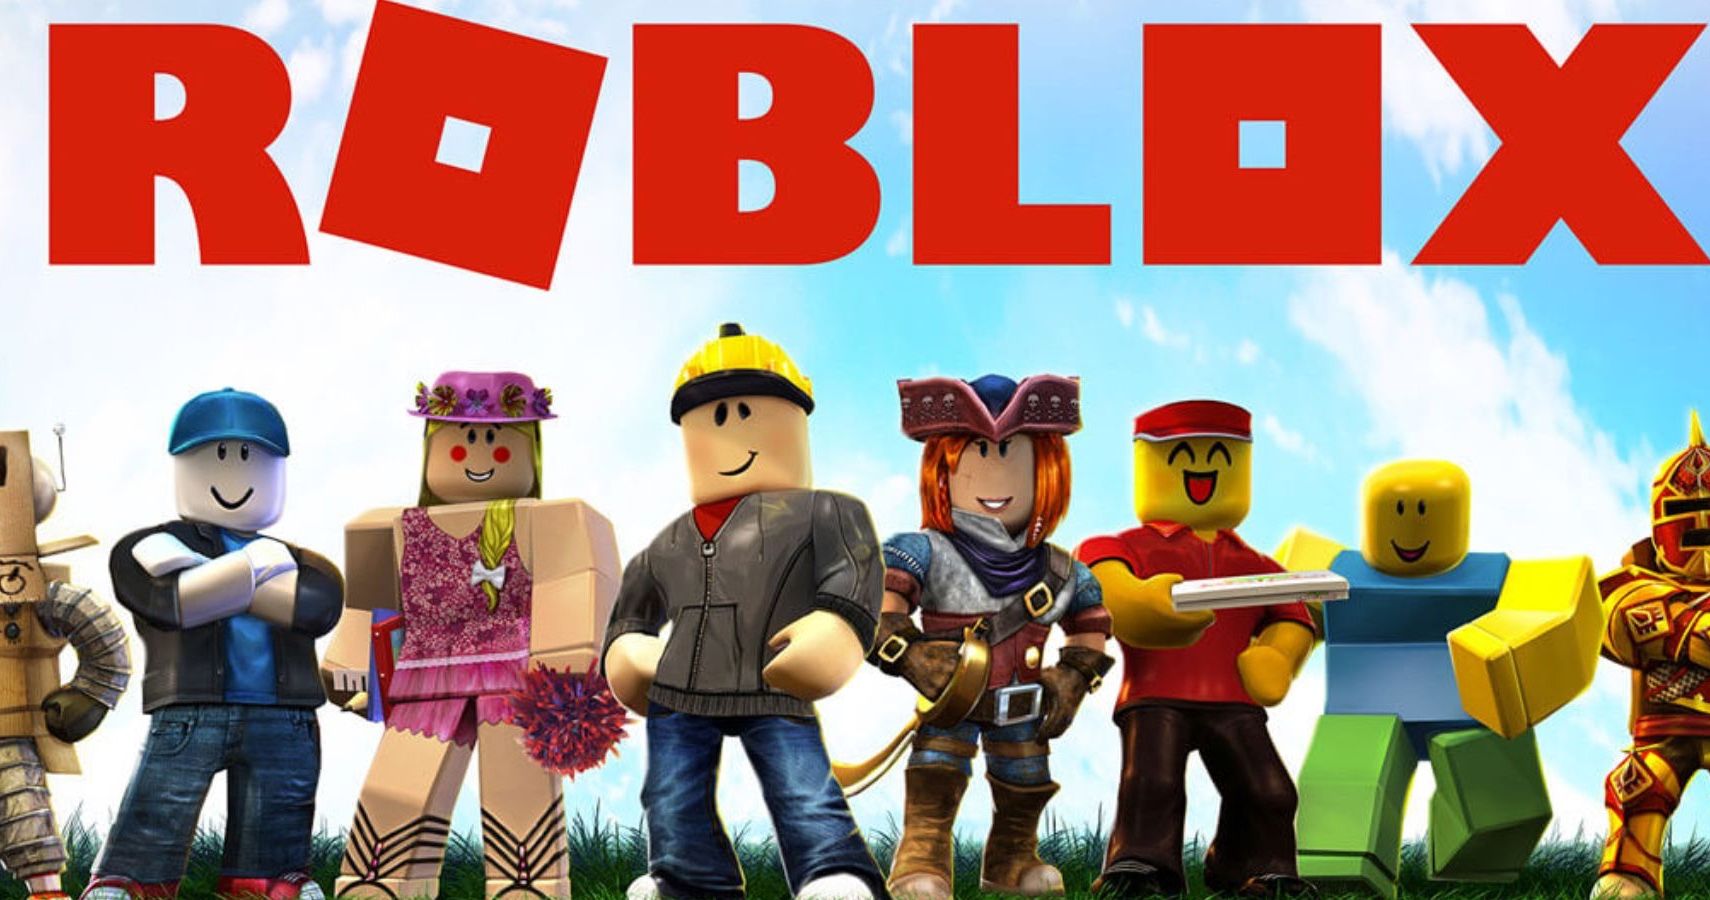 IGN on X: The Roblox oof sound, which became famous not just